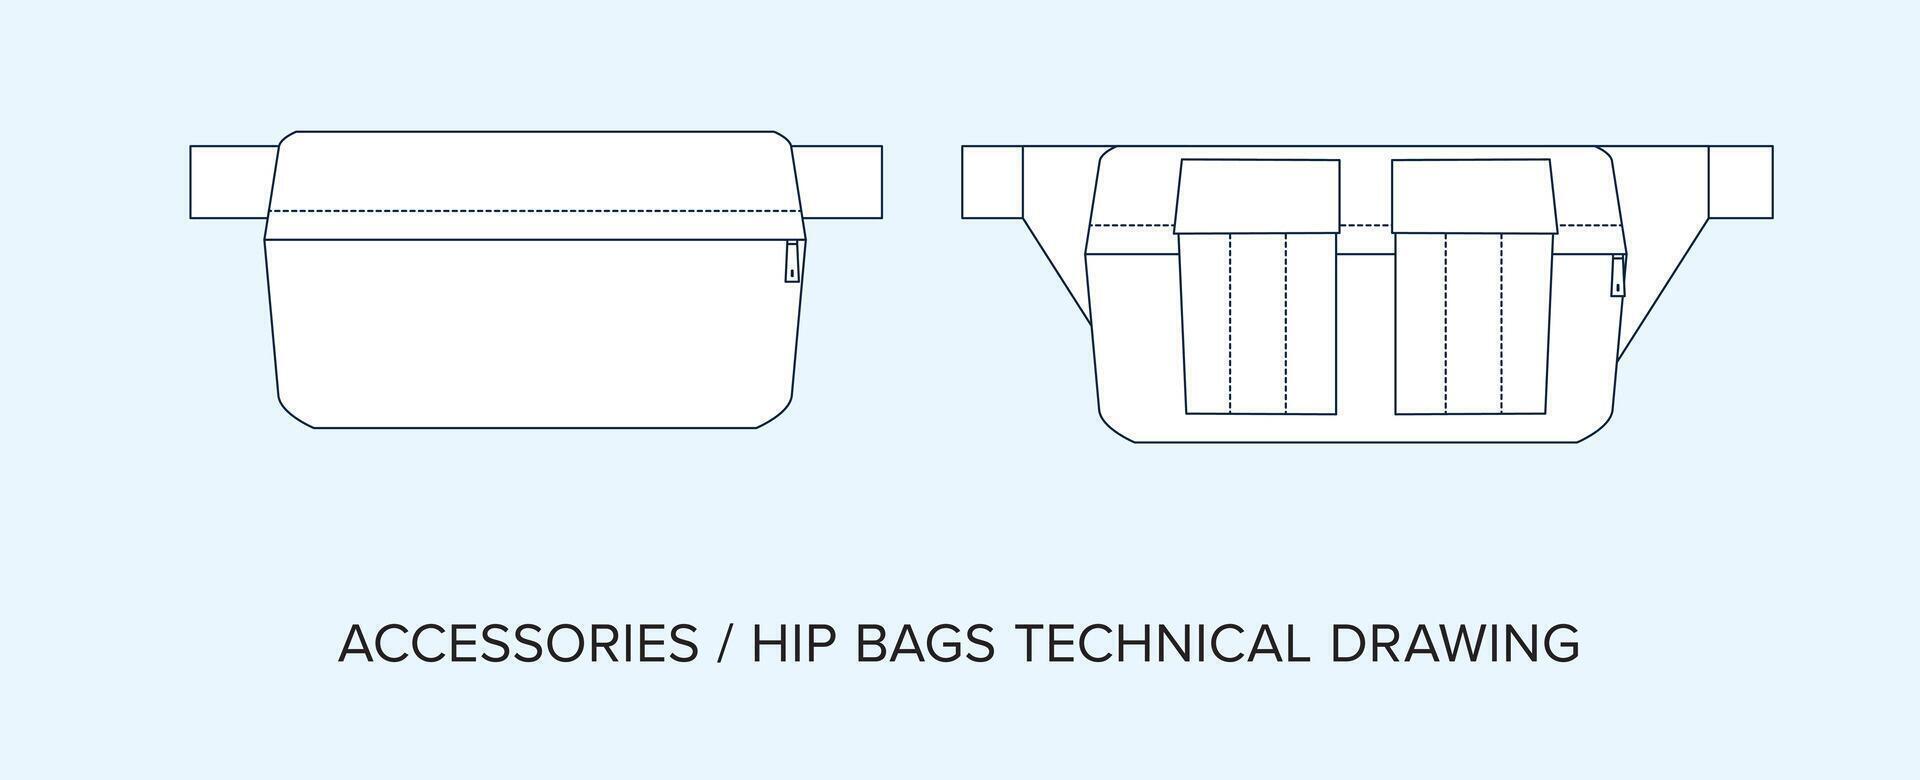 Waist Bags Fanny Packs, Technical Drawing, Accessory Blueprint for Fashion Designers vector